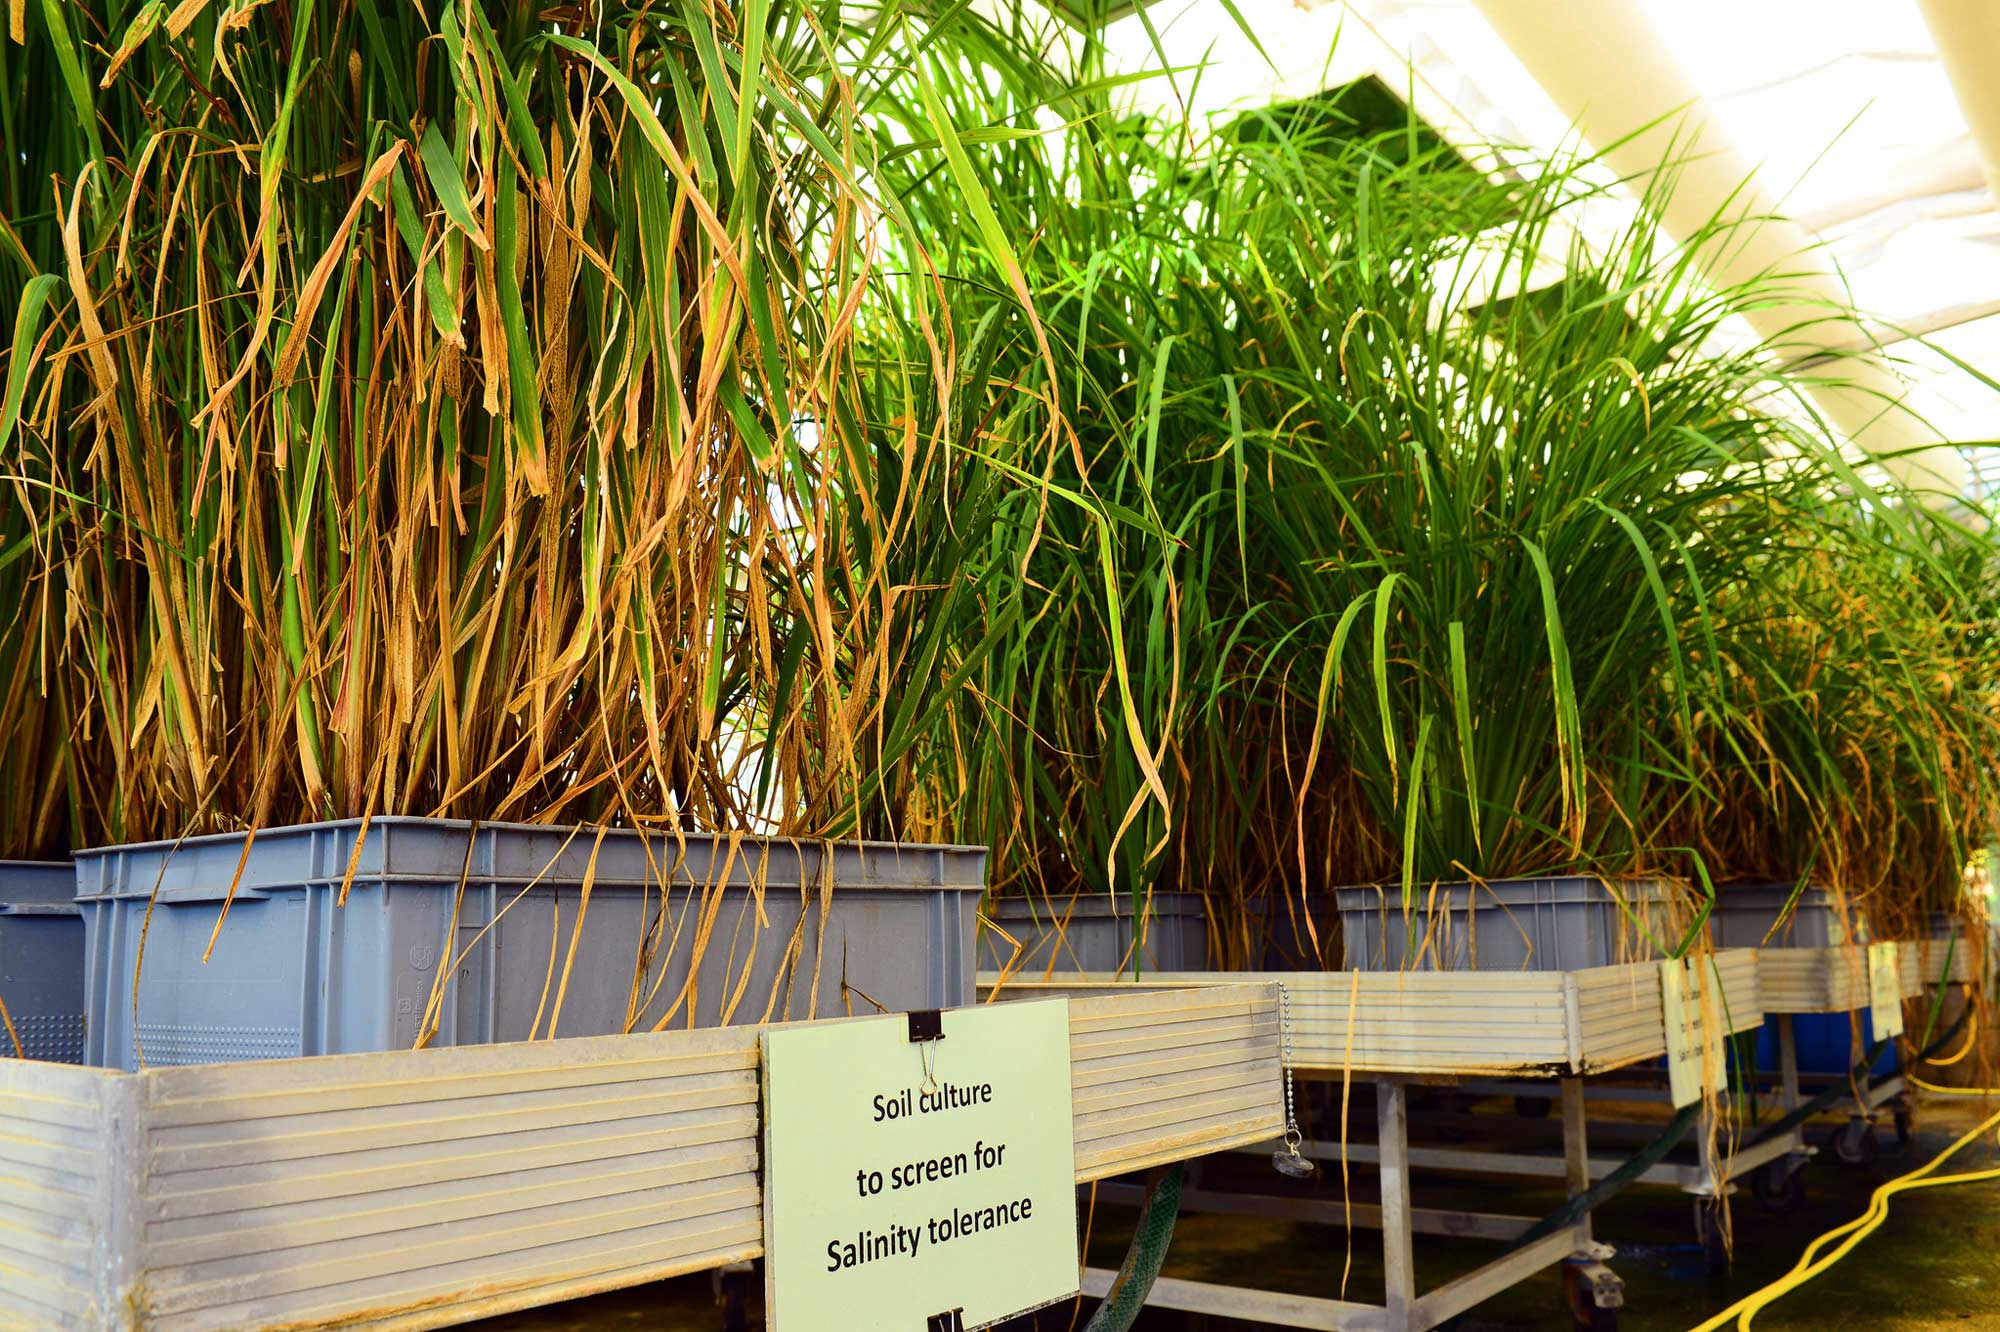 Photograph of a greenhouse for plant breeding. The photo shows a row of gray metal tables; the top of each table is surrounded by rail. On the tabletops are blue rectangular containers, each with clumps of grass growing in them. The tables are labeled. The nearest table has a label that says "Soil culture to screen for salinity tolerance."